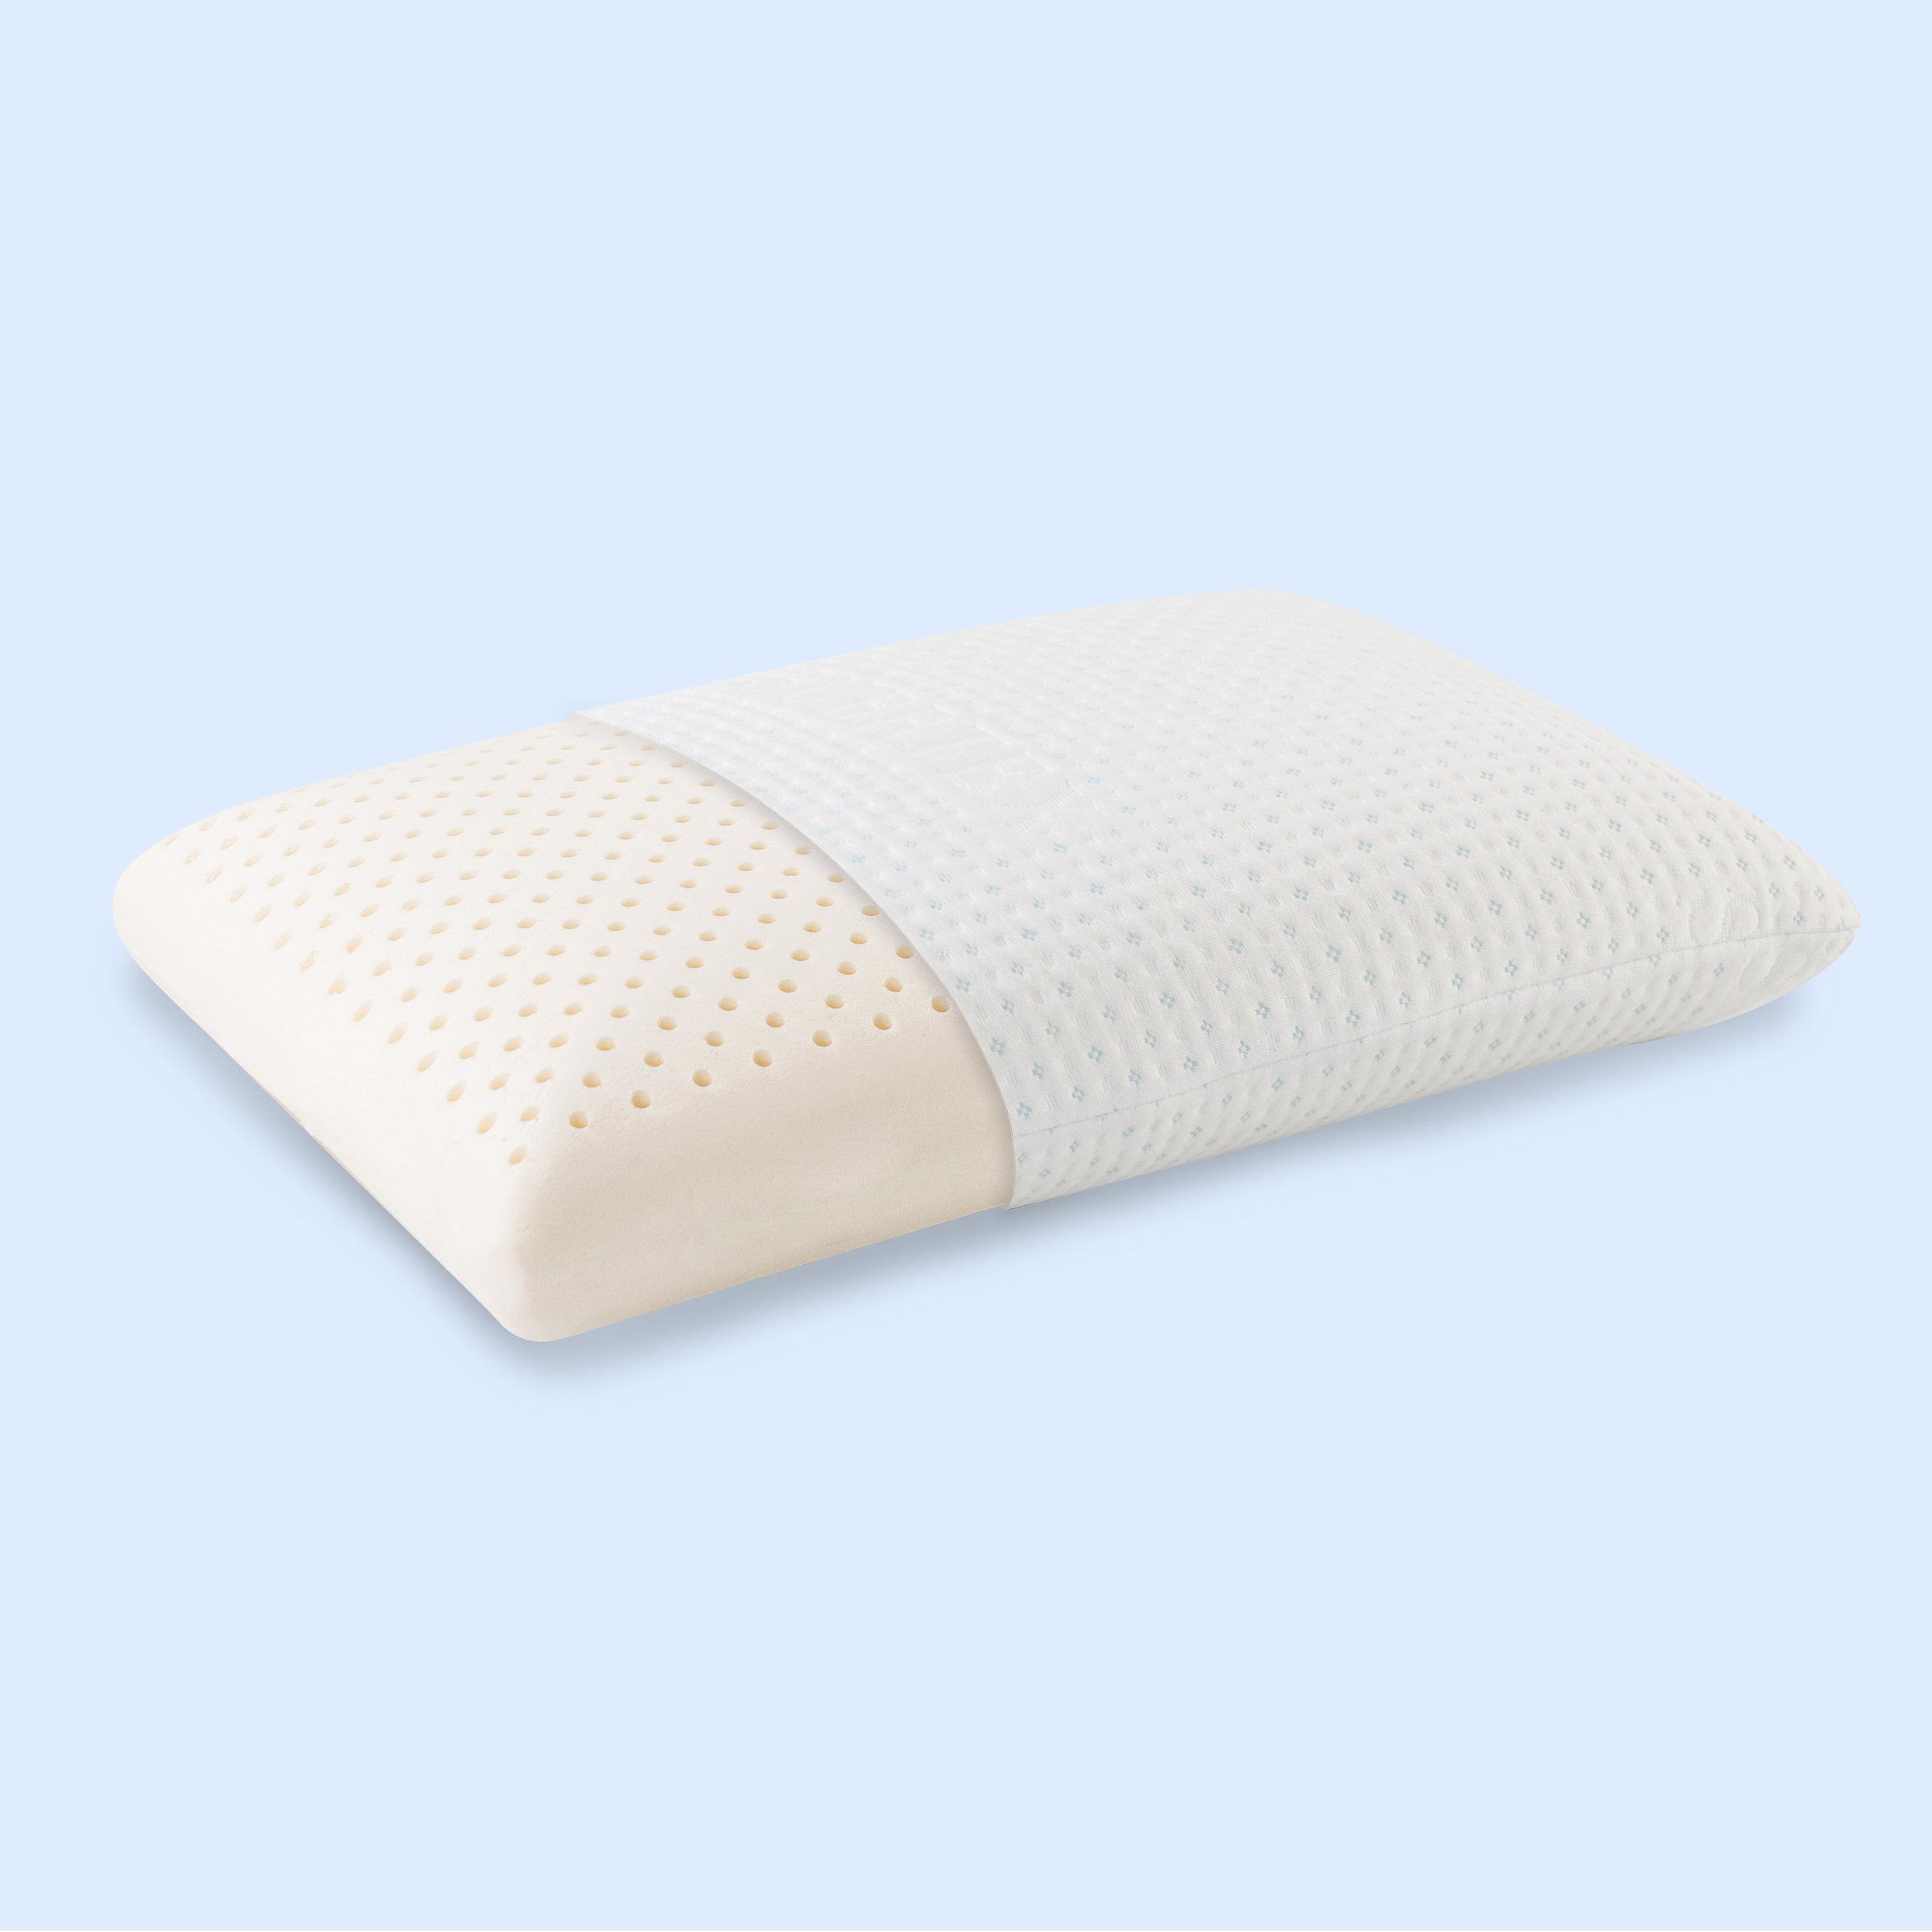 Comfortable Breathable Latex Pillow Firm Durable Support with Removable Cover 